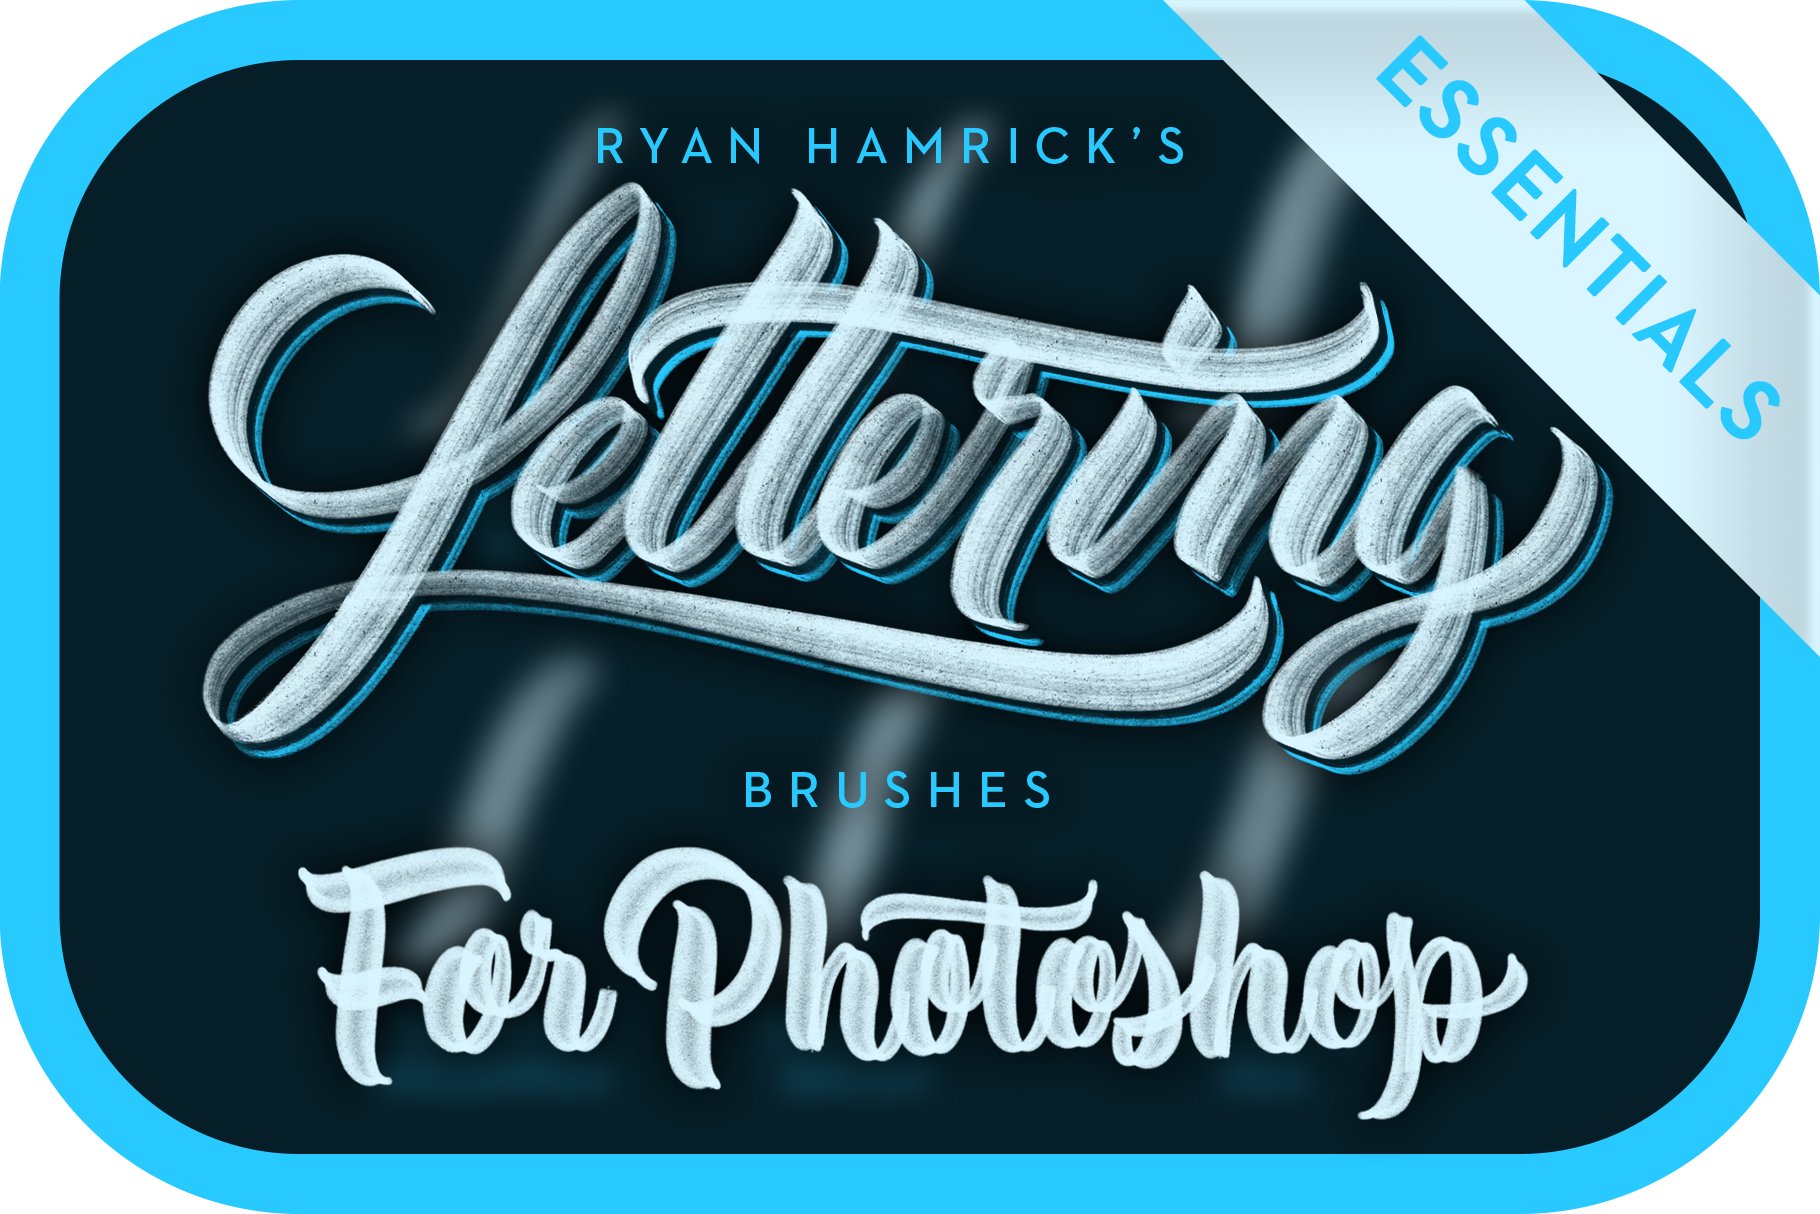 PS Lettering Brushes (Essentials)cover image.